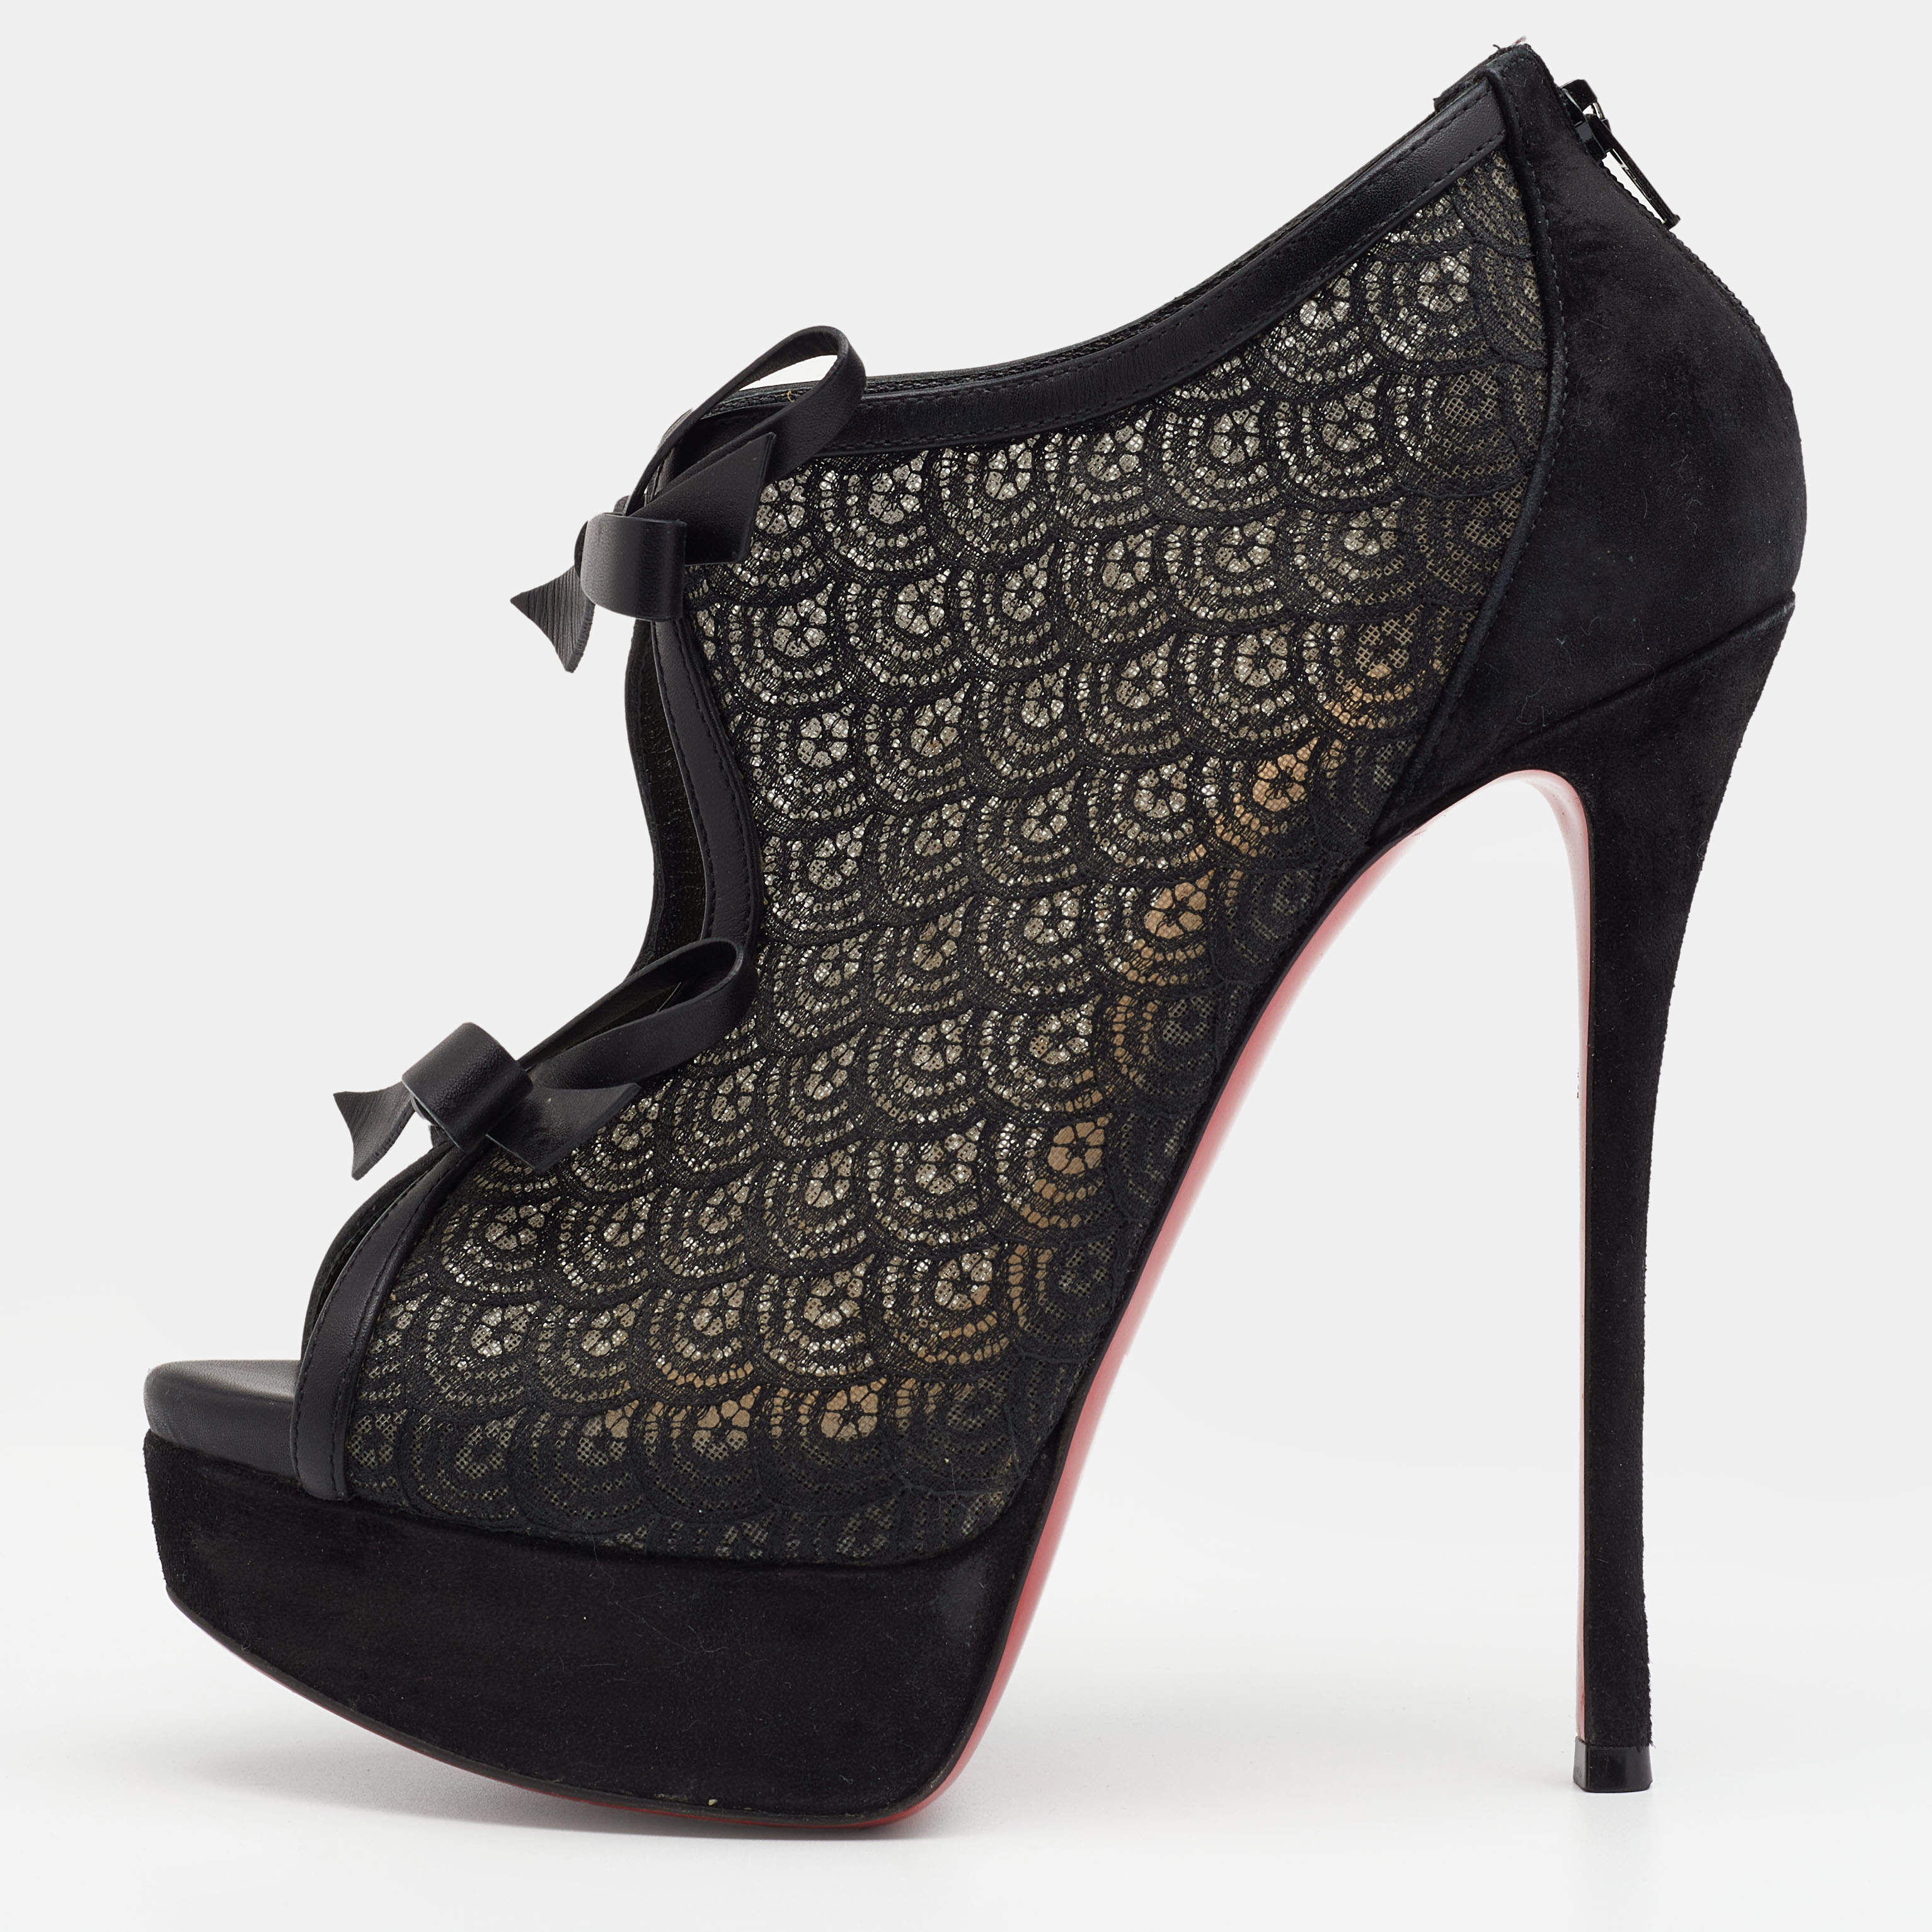 Christian Louboutin Womens Ankle & Booties Boots, Black, Stock Check Required 37